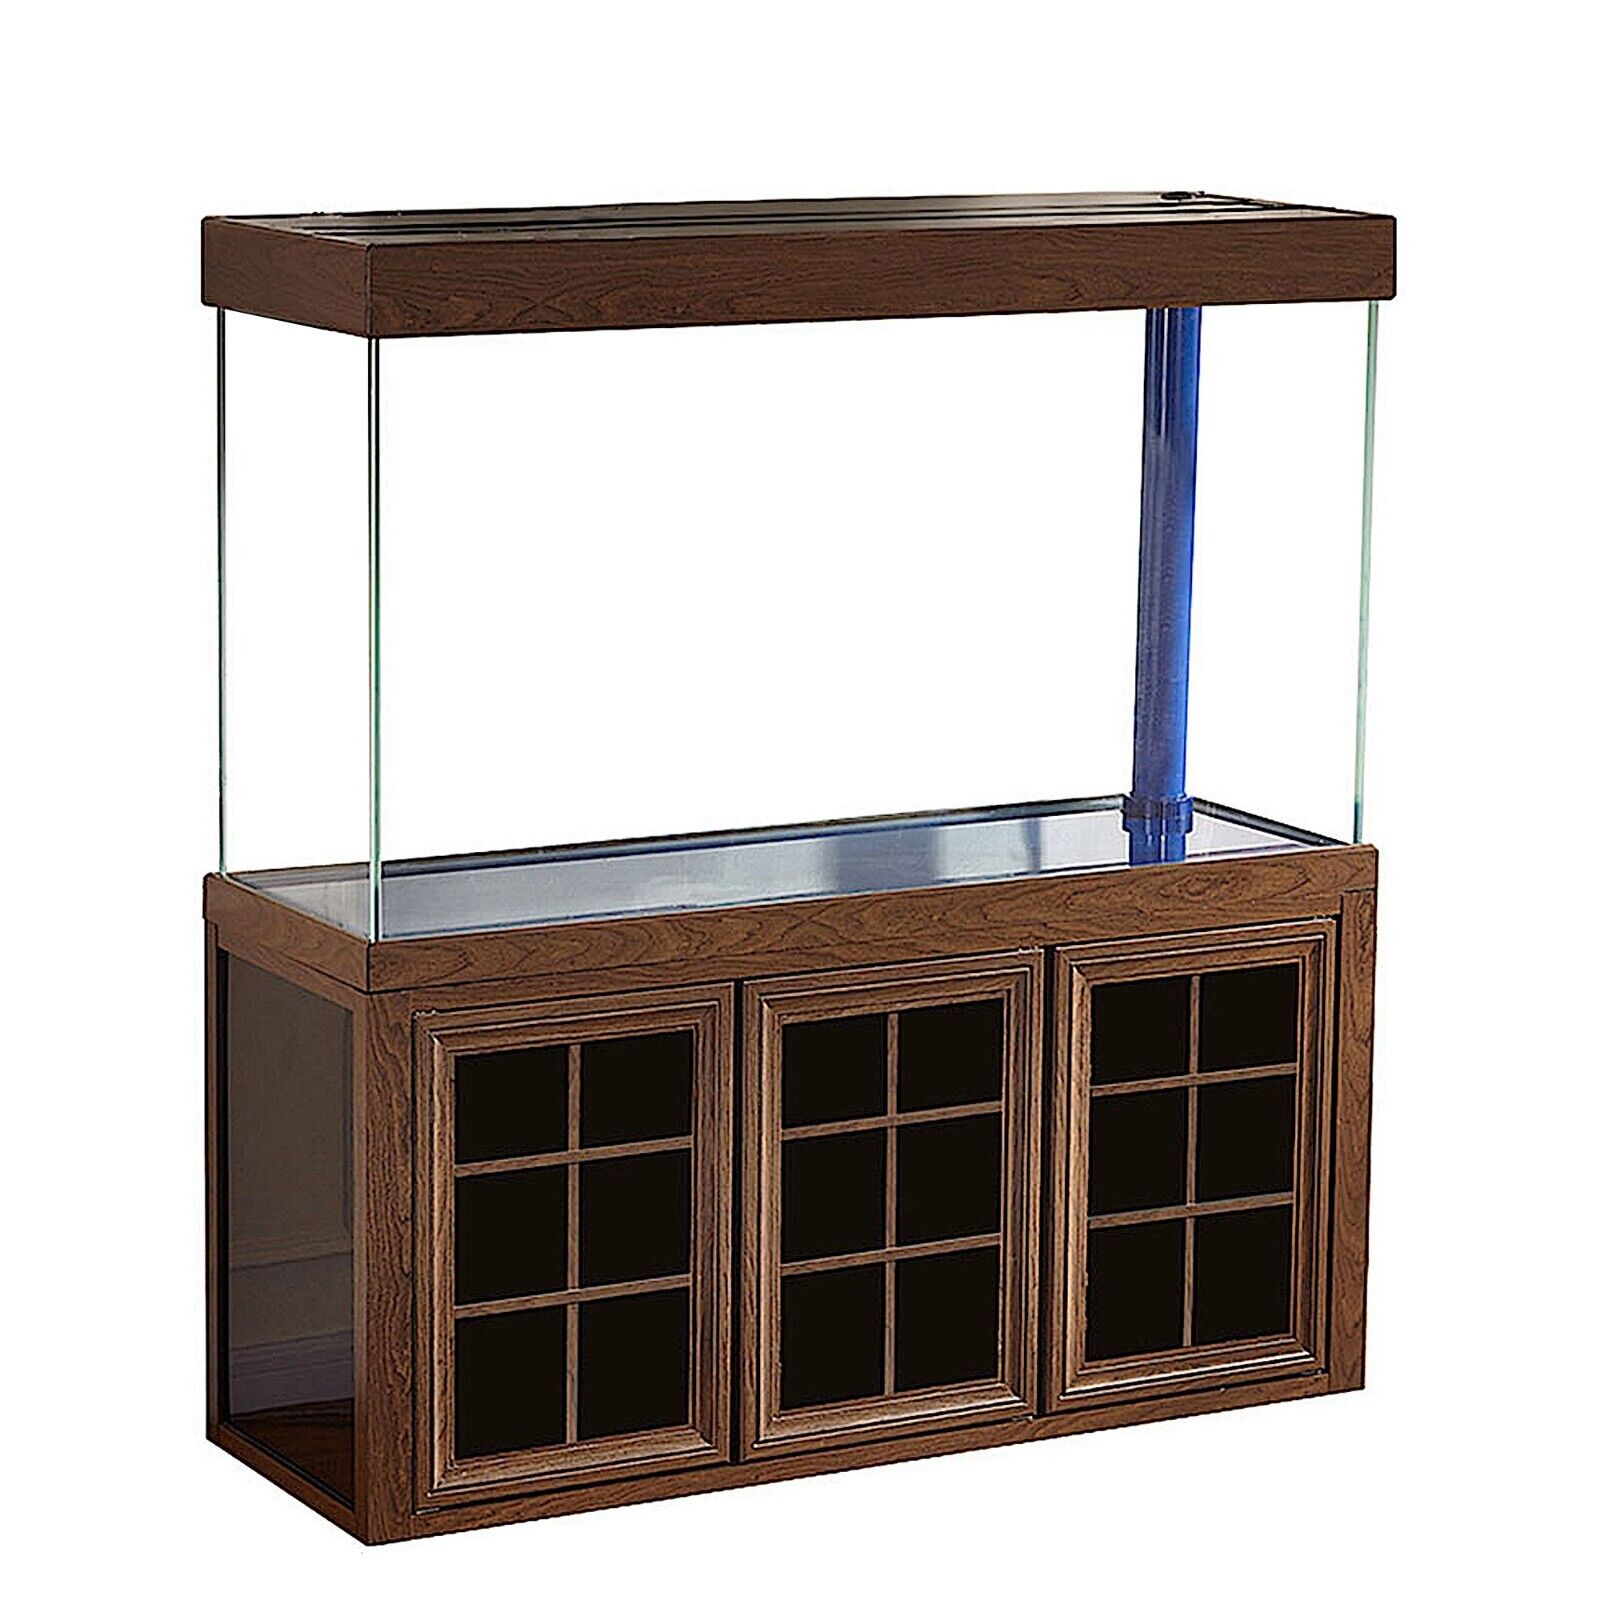 Aquarium 170 Gallon Tempered Glass with LED Light Complete Fish Tank Brown Wood